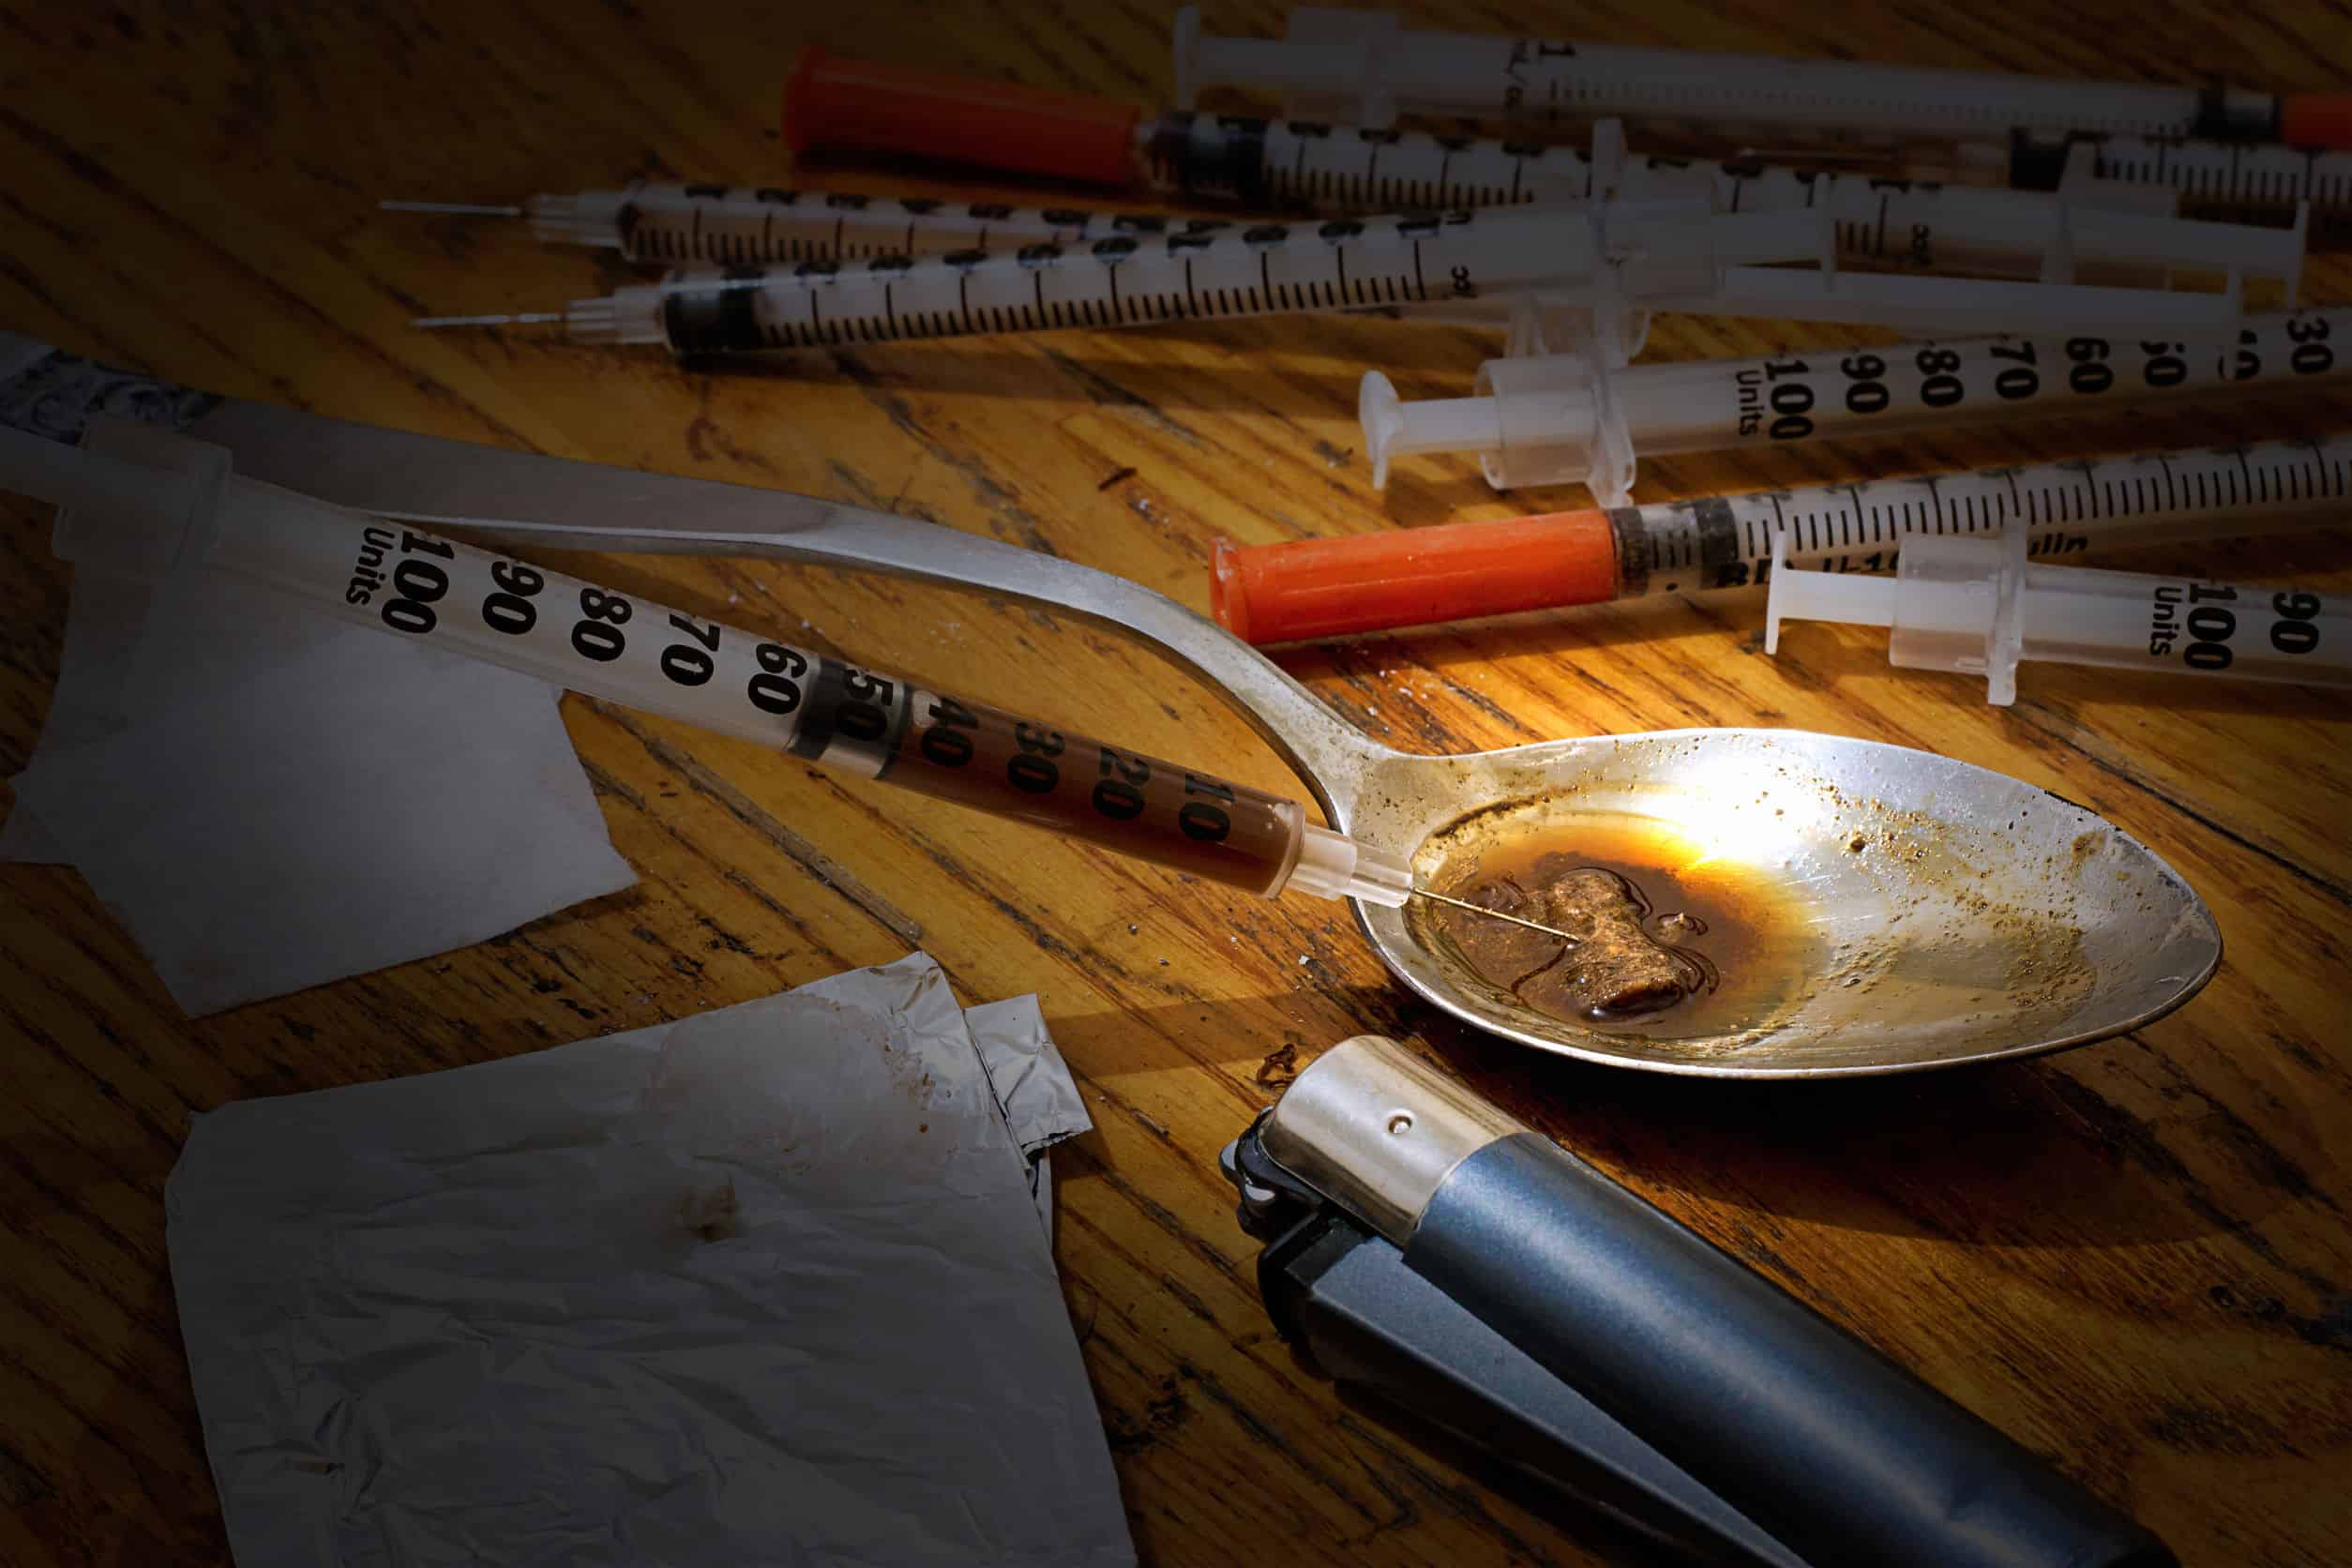 Possessing These Drugs in Colorado Nets You the Most Serious Penalties